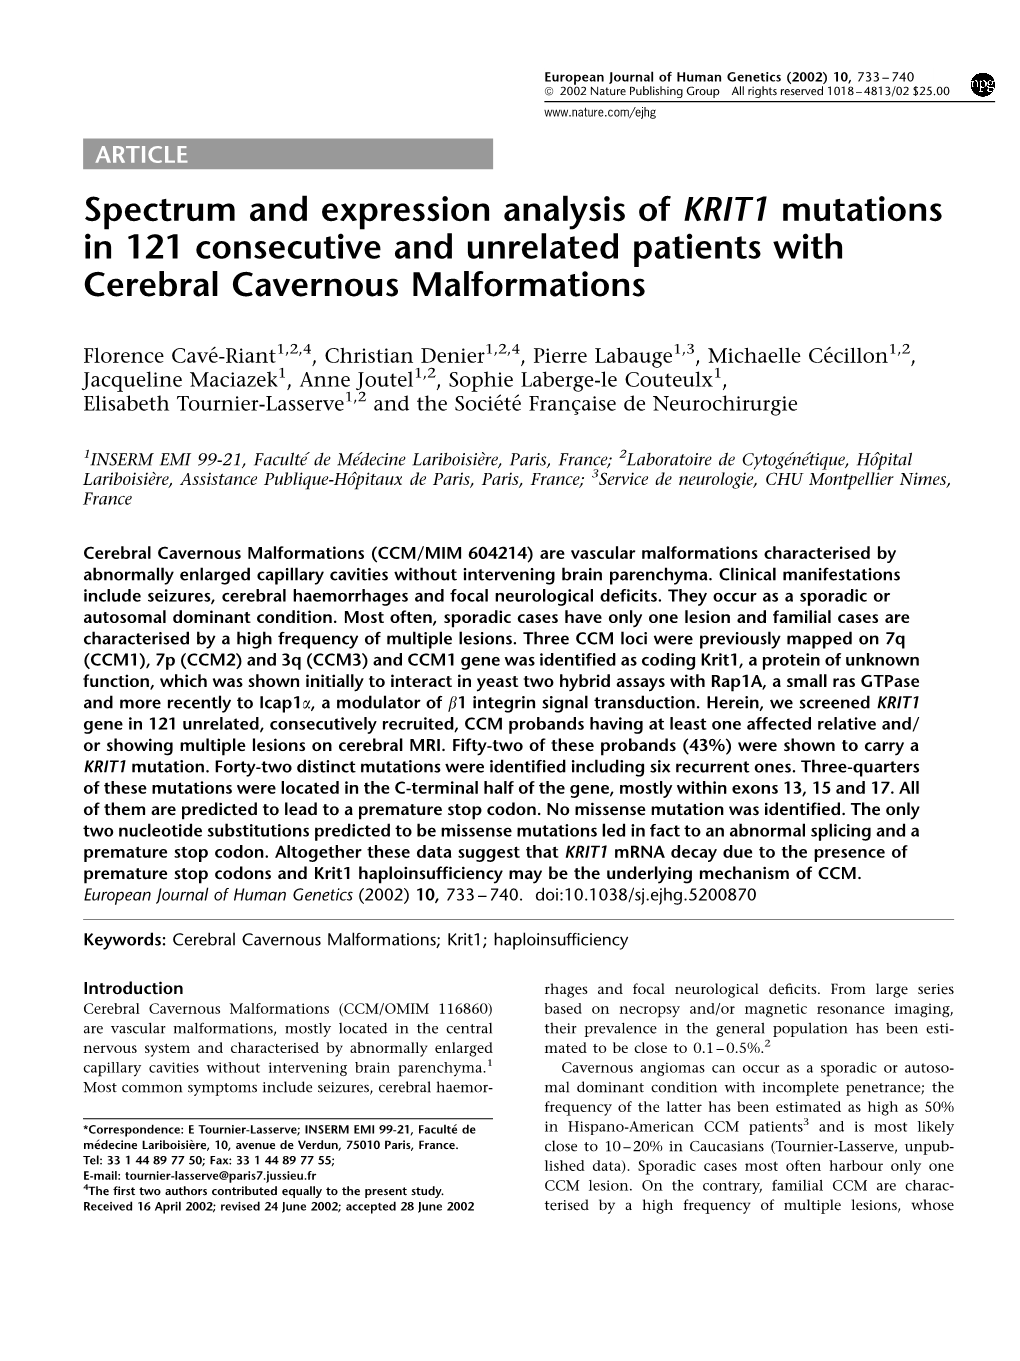 Spectrum and Expression Analysis of KRIT1 Mutations in 121 Consecutive and Unrelated Patients with Cerebral Cavernous Malformations